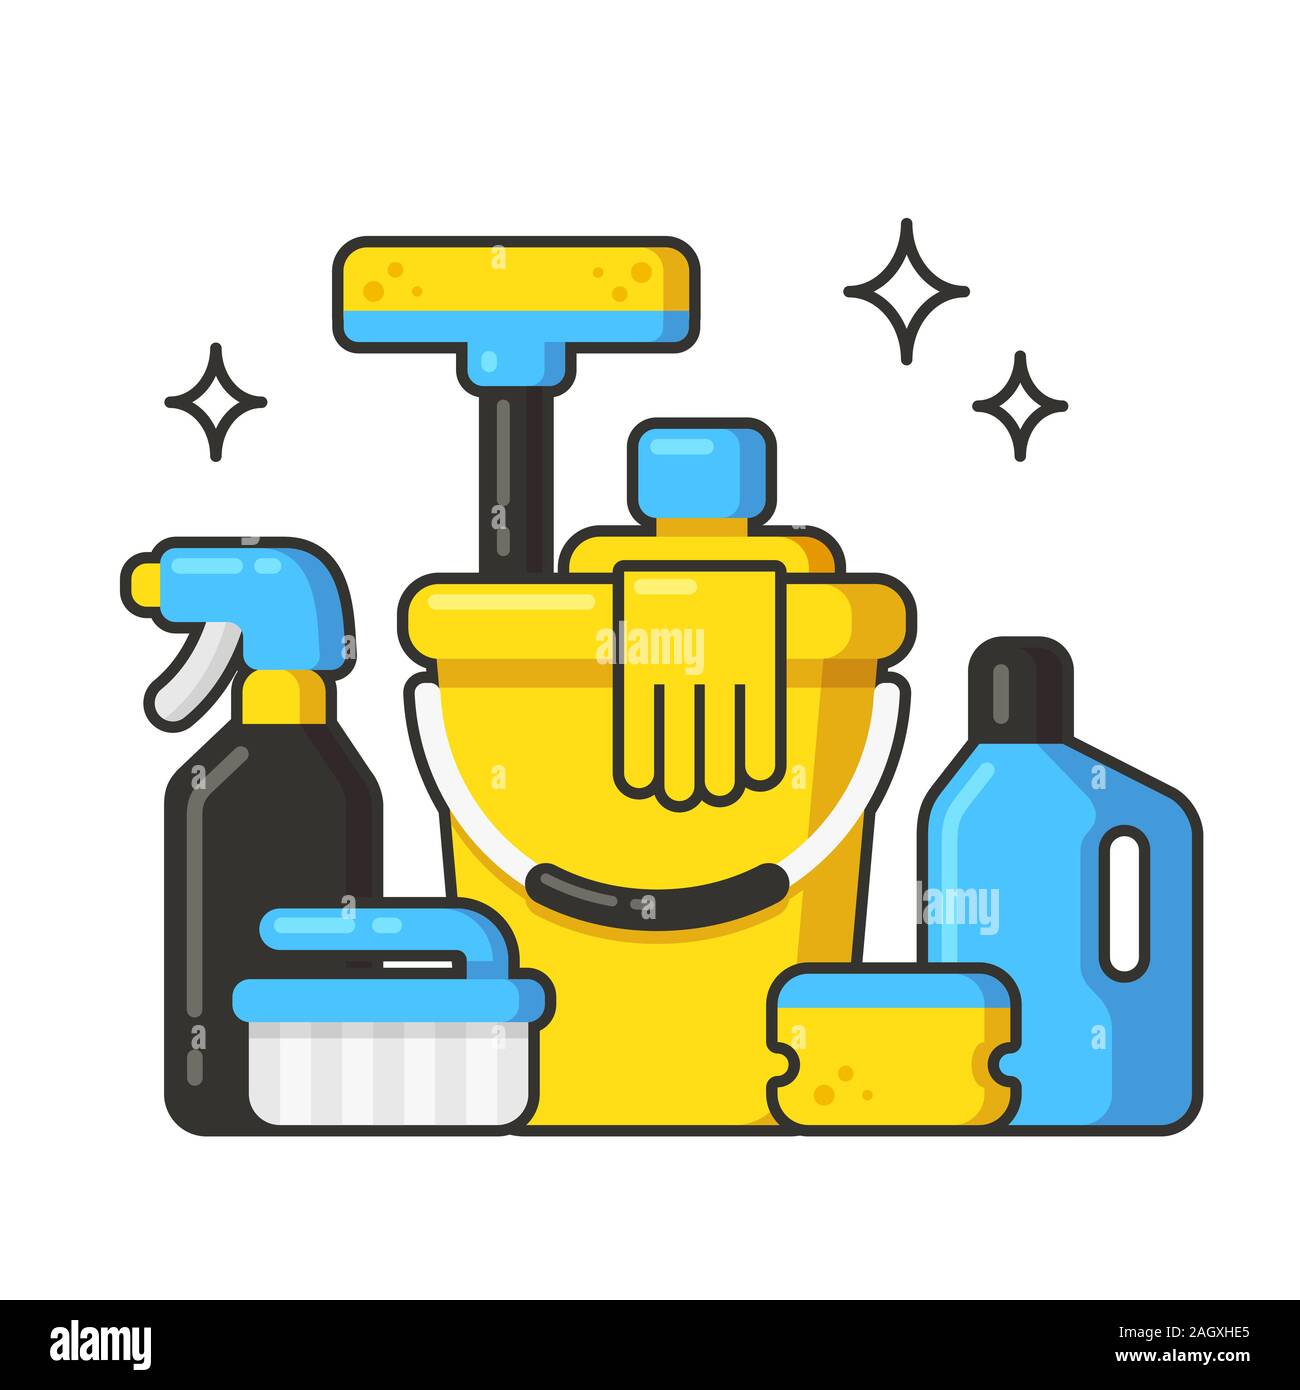 https://c8.alamy.com/comp/2AGXHE5/cleaning-supplies-objects-set-brushes-sponges-bottles-of-cleaner-liquids-in-simple-flat-cartoon-style-isolated-vector-clip-art-illustration-2AGXHE5.jpg